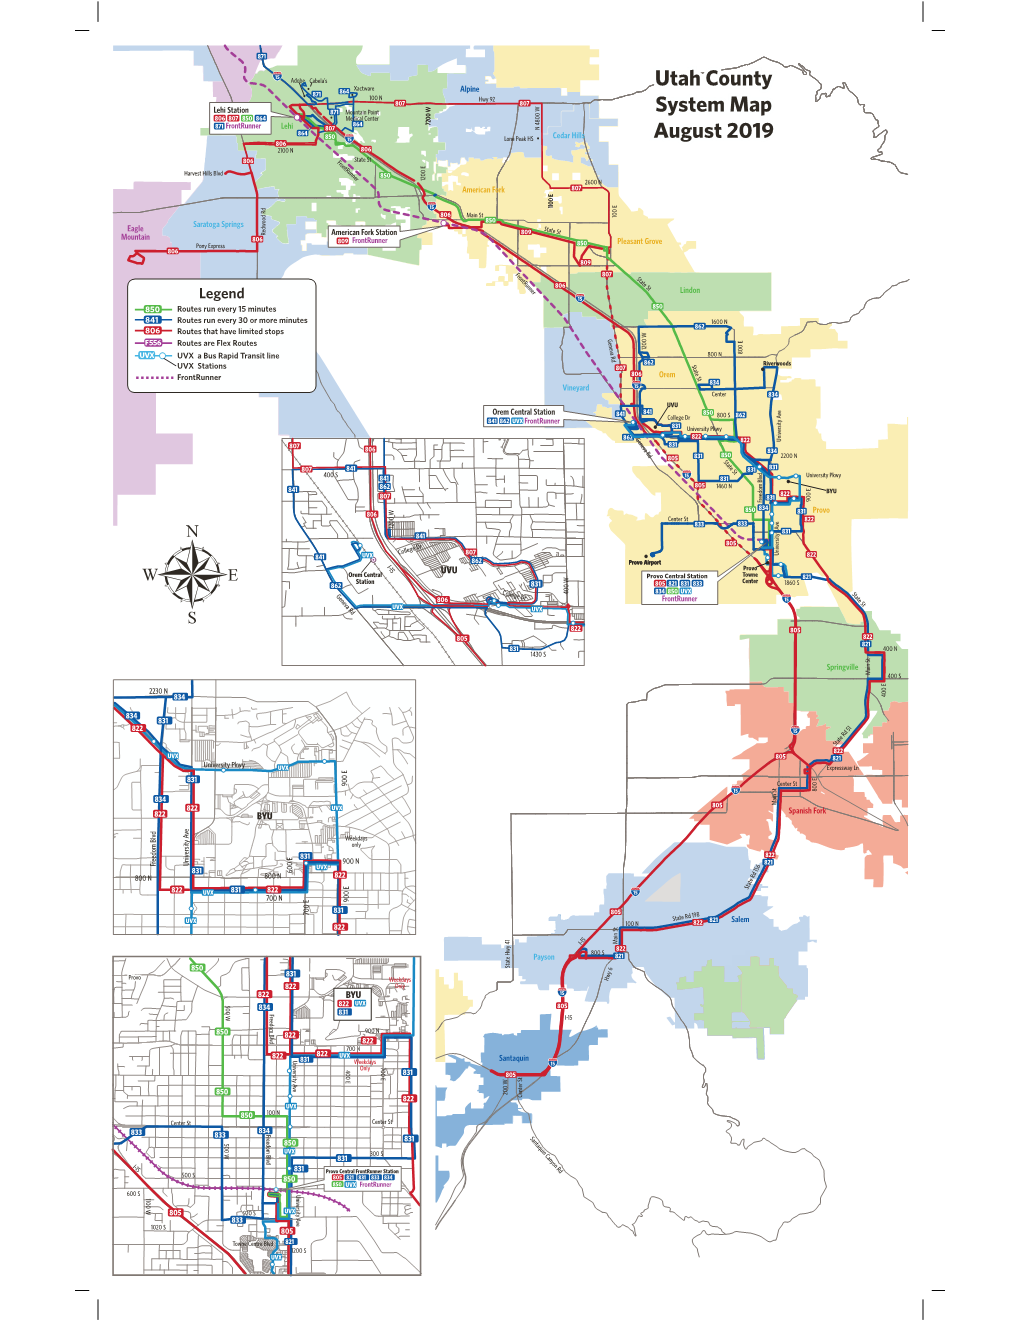 Utah County System Map August 2019